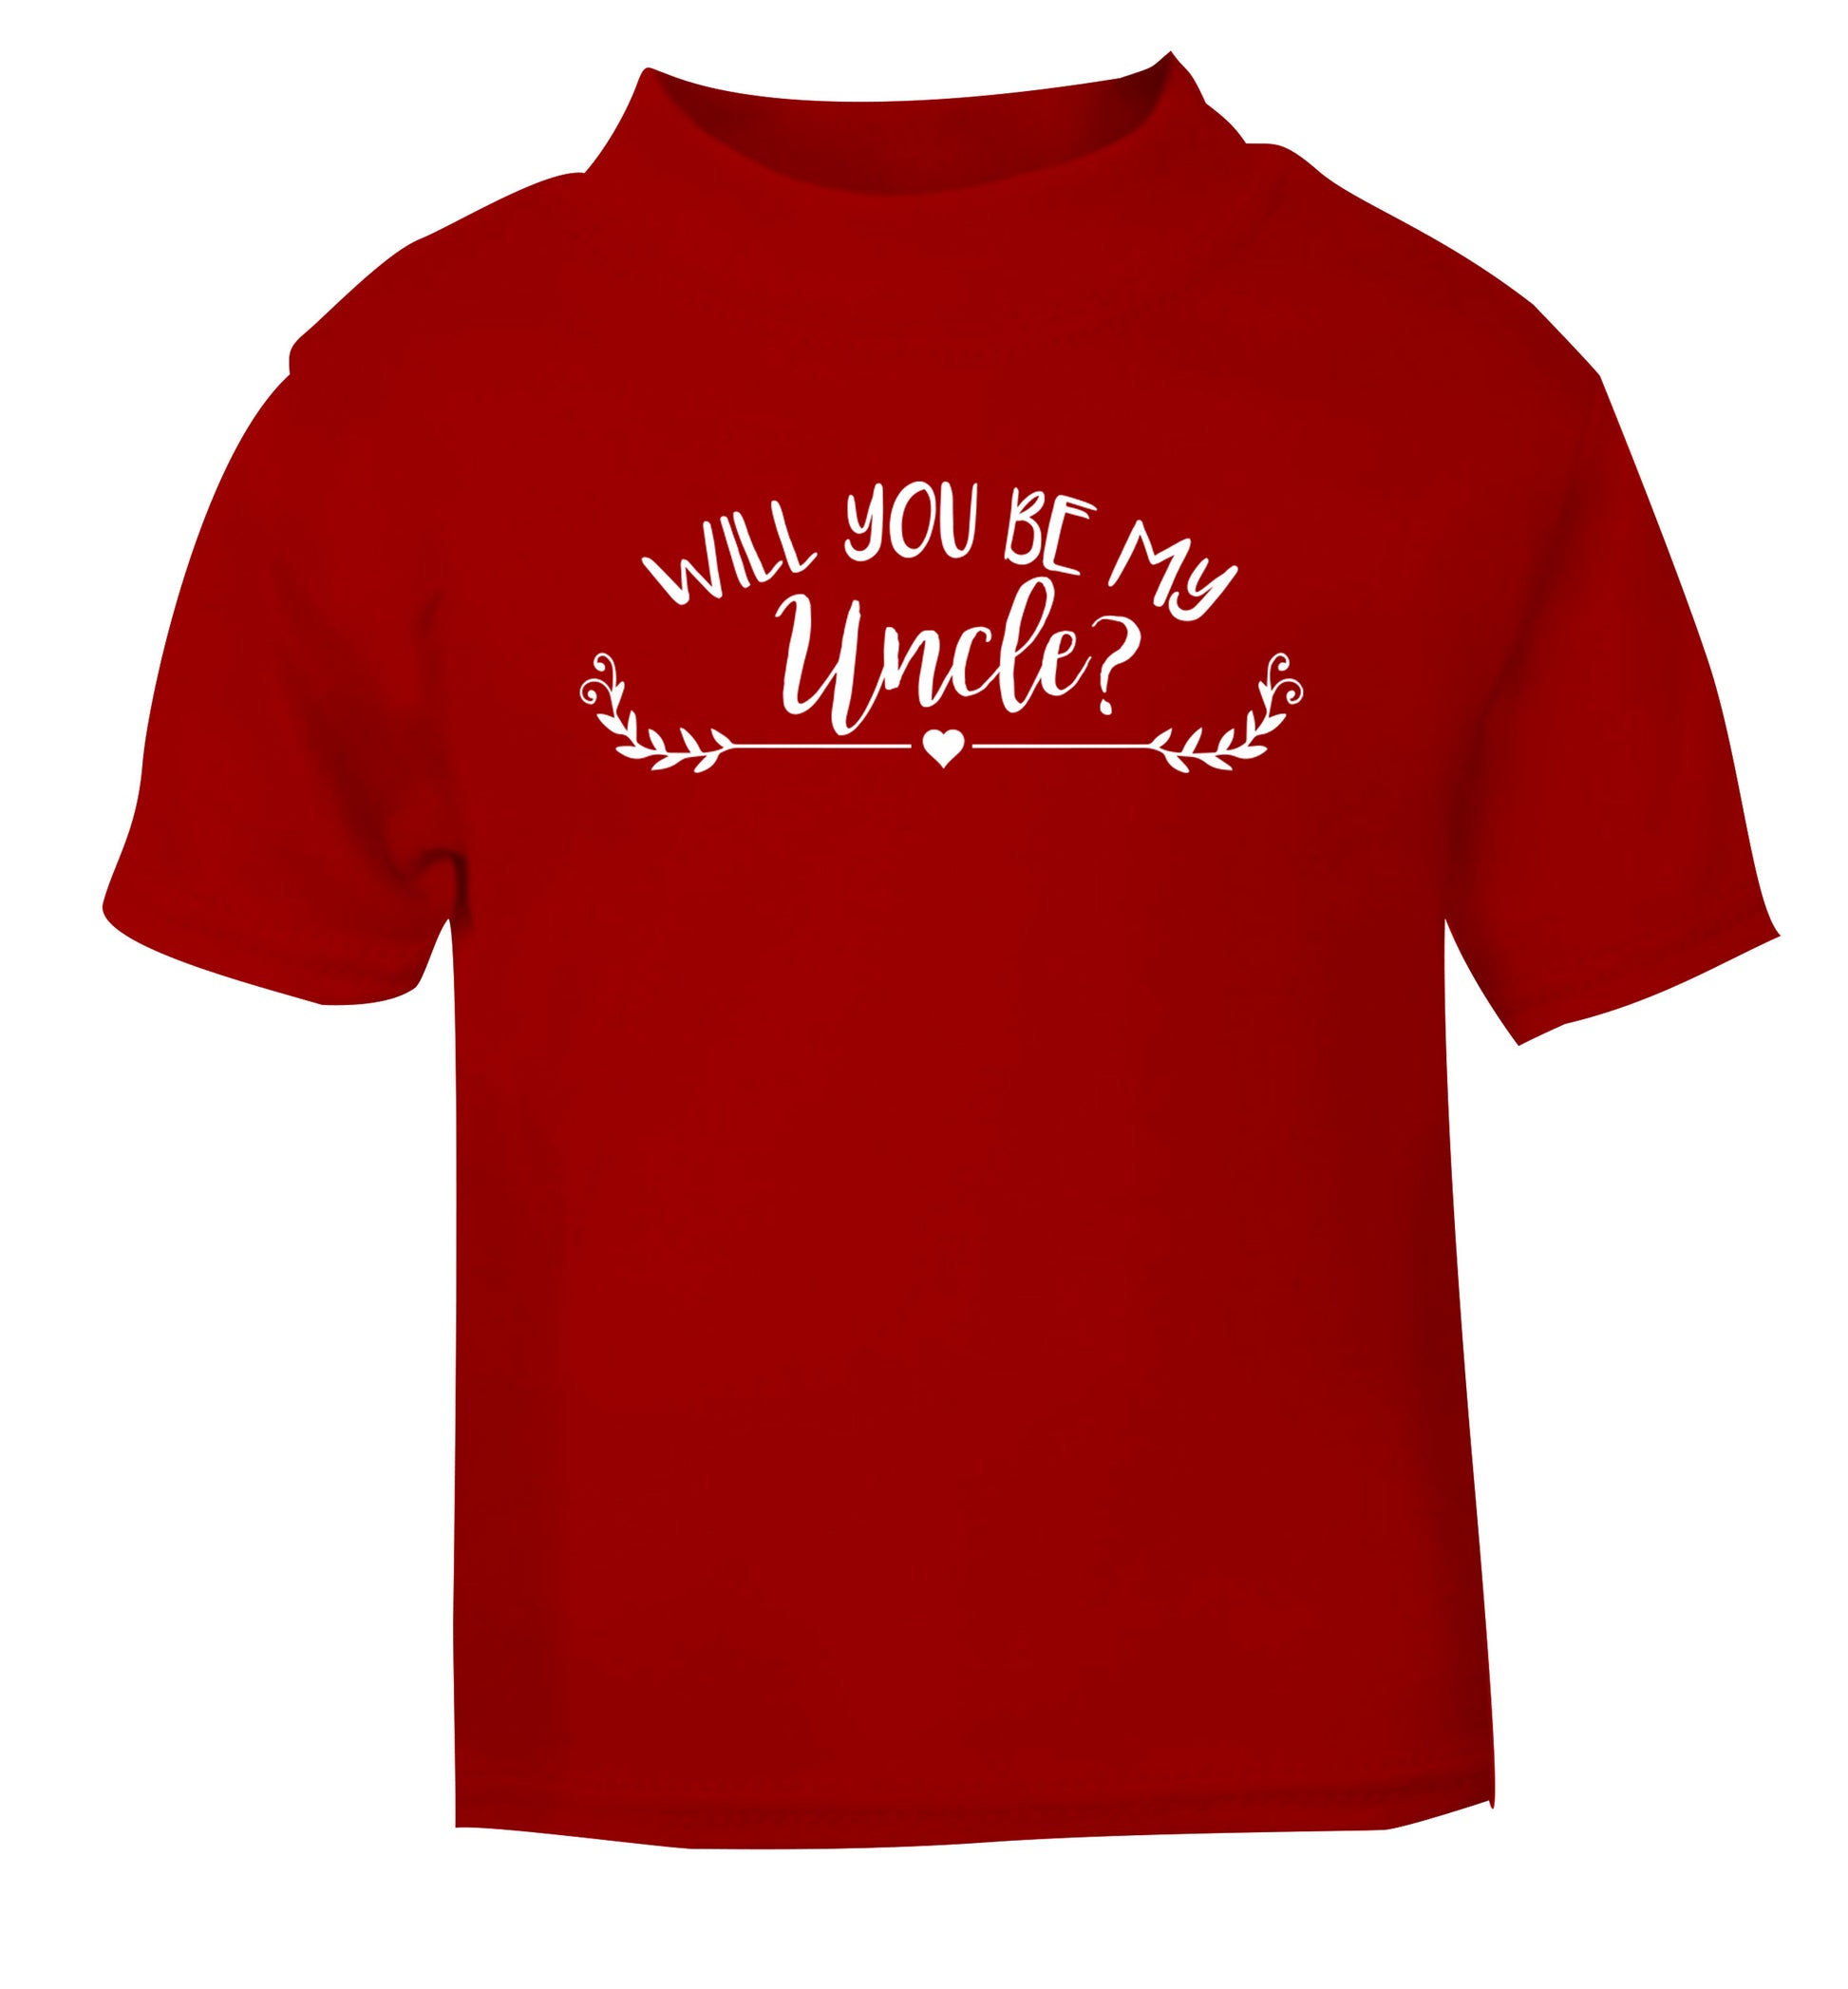 Will you be my uncle? red Baby Toddler Tshirt 2 Years